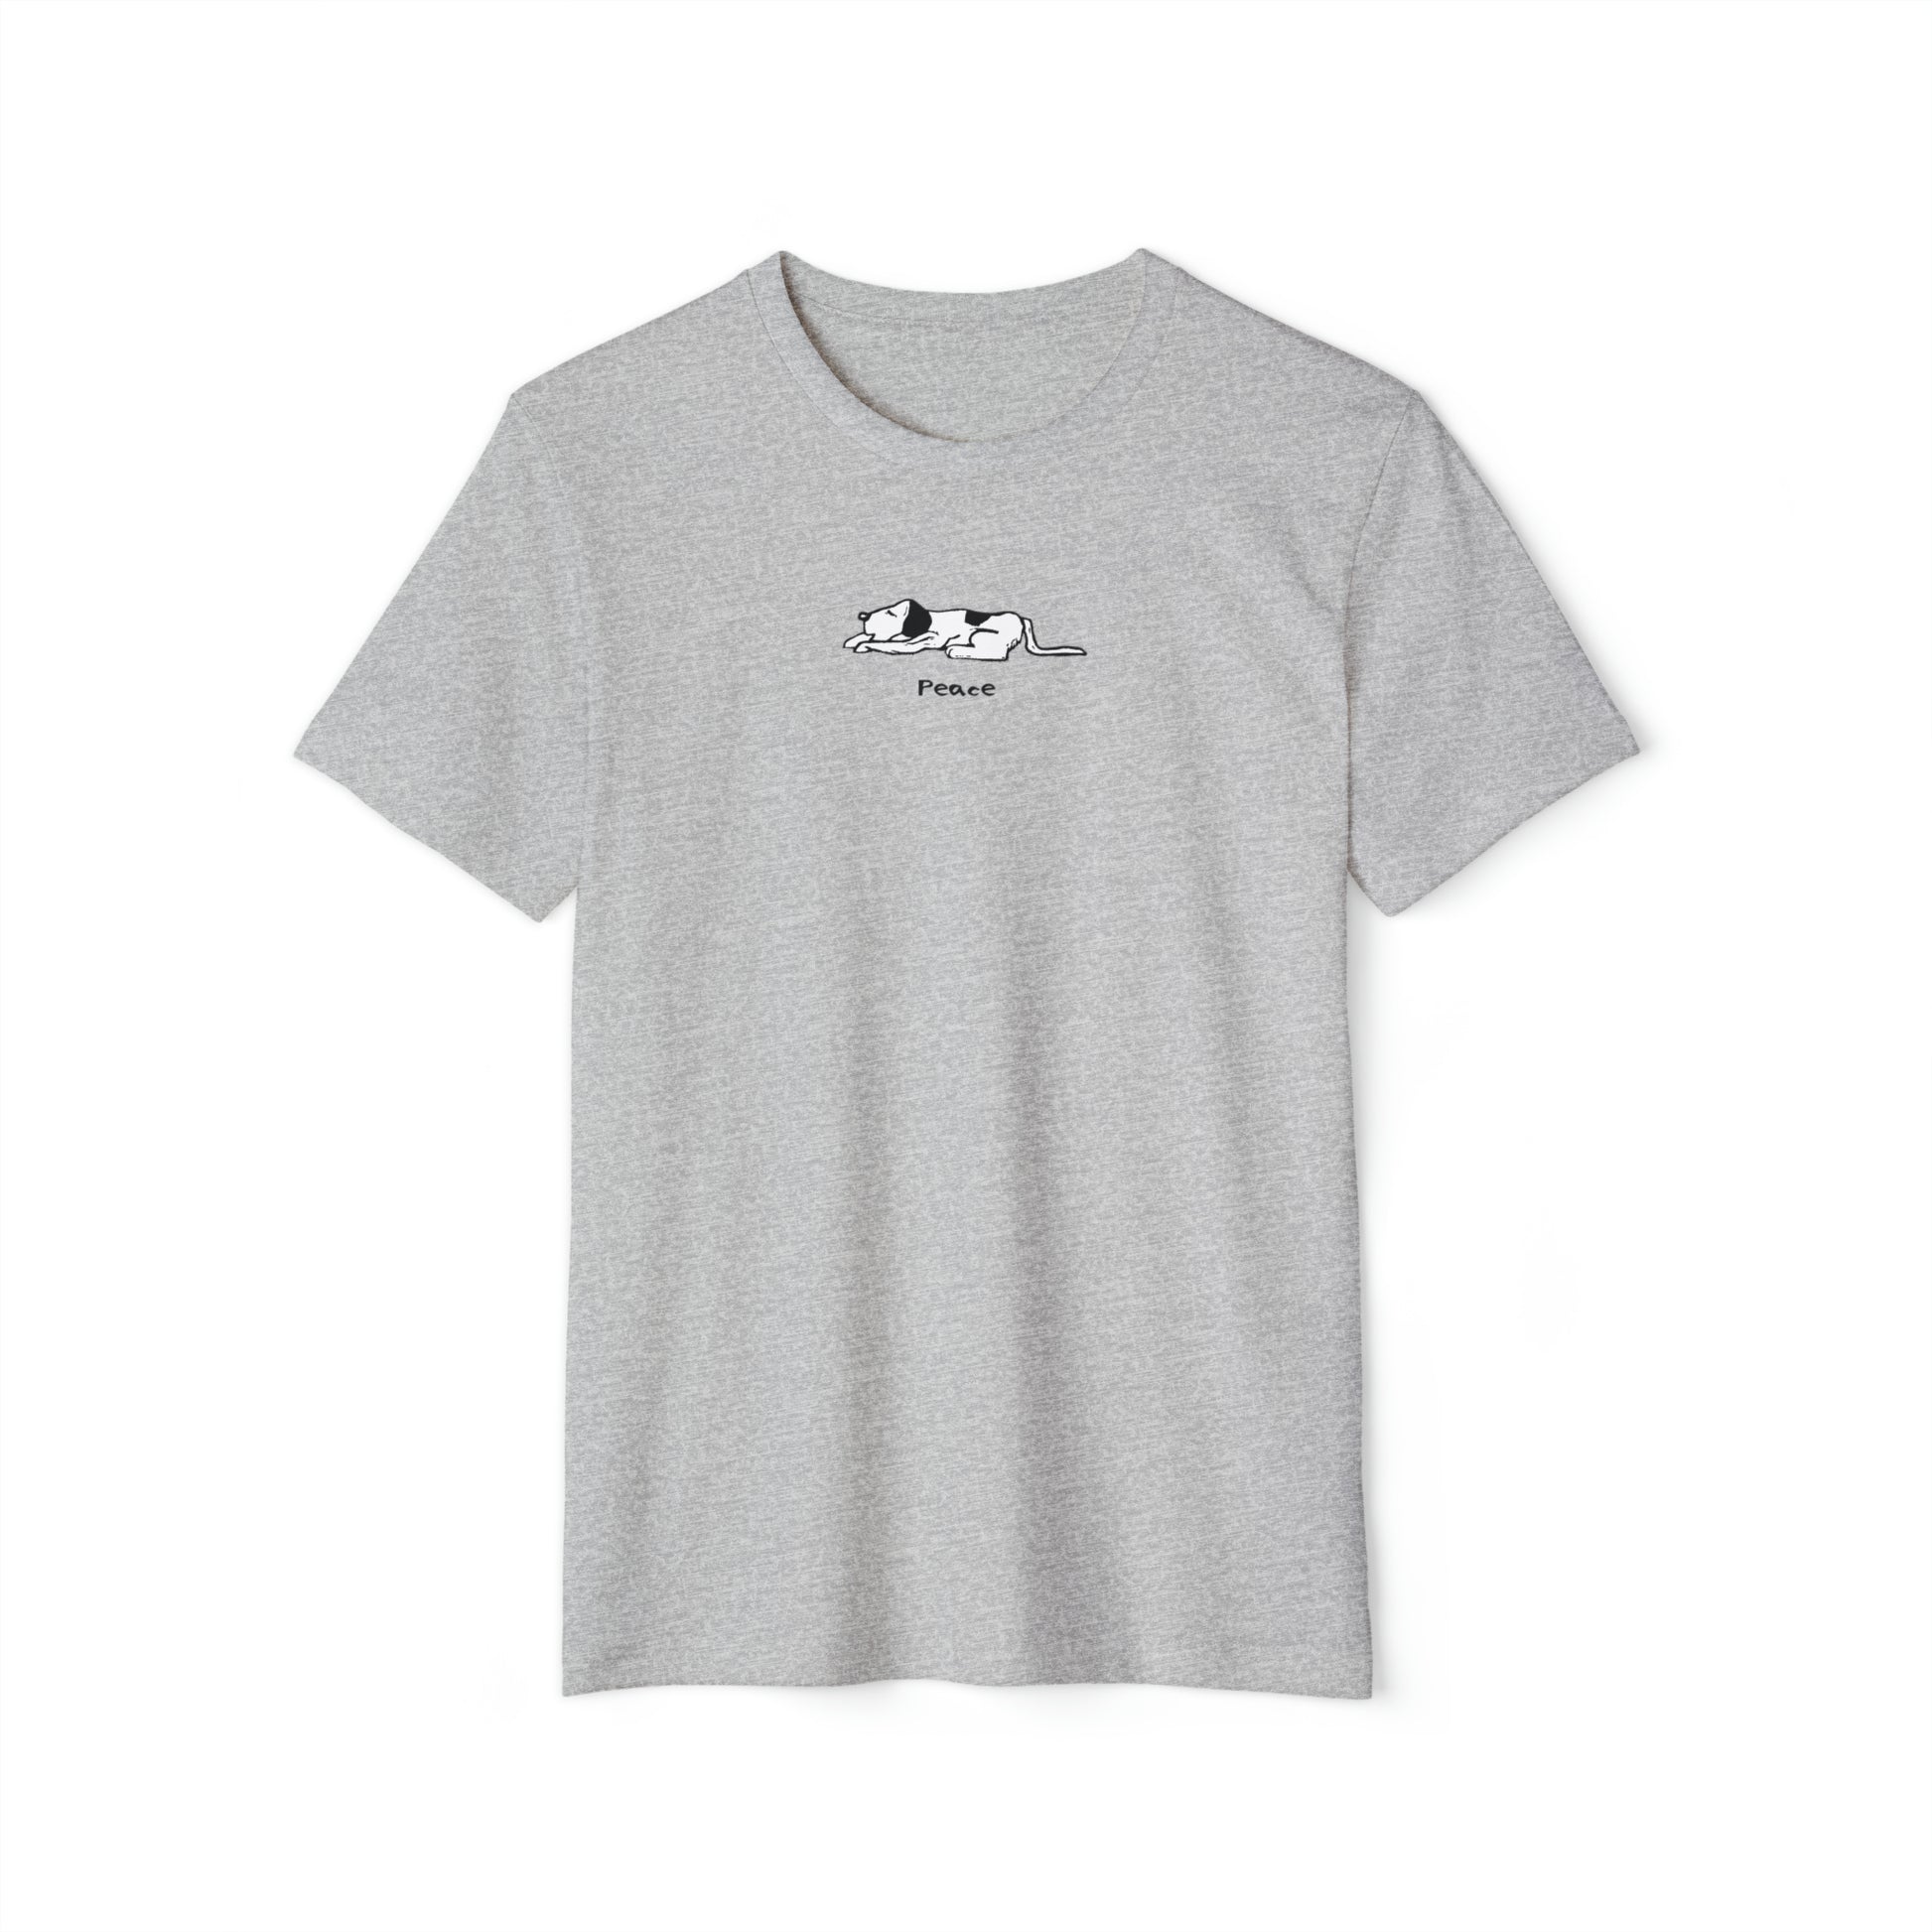 Black and white lying down sleeping dog on athletic heather grey color unisex men's t-shirt. Text under image says Peace.